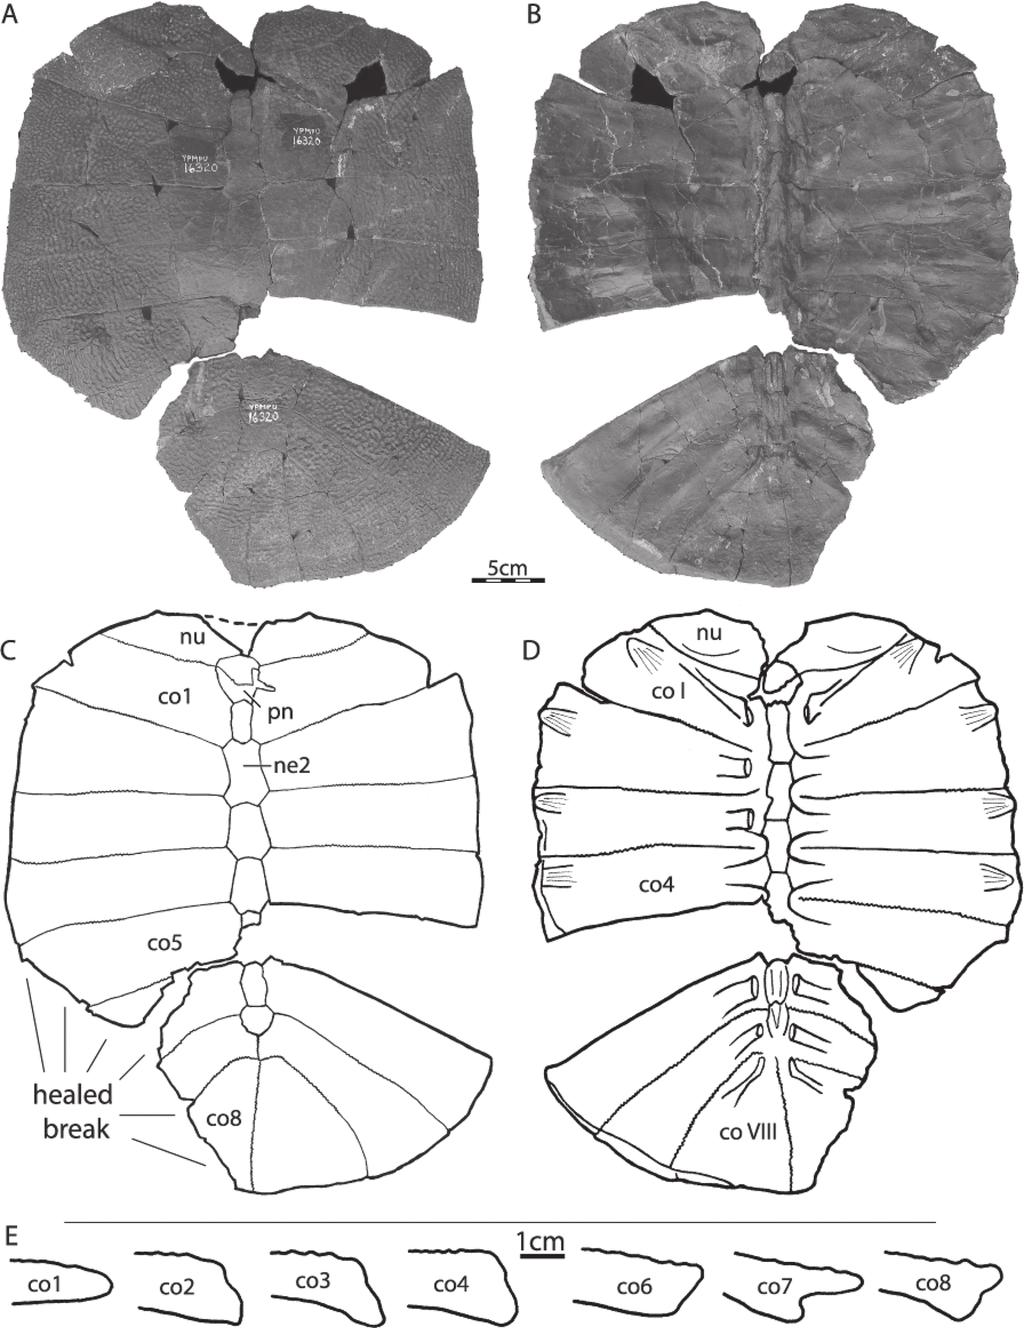 Two New Plastomenine Softshell Turtles Joyce et al. 317 Figure 6. YPM PU 16320, paratype of Hutchemys arctochelys sp. nov. A. Dorsal view of carapace. B. Ventral view of carapace. C.